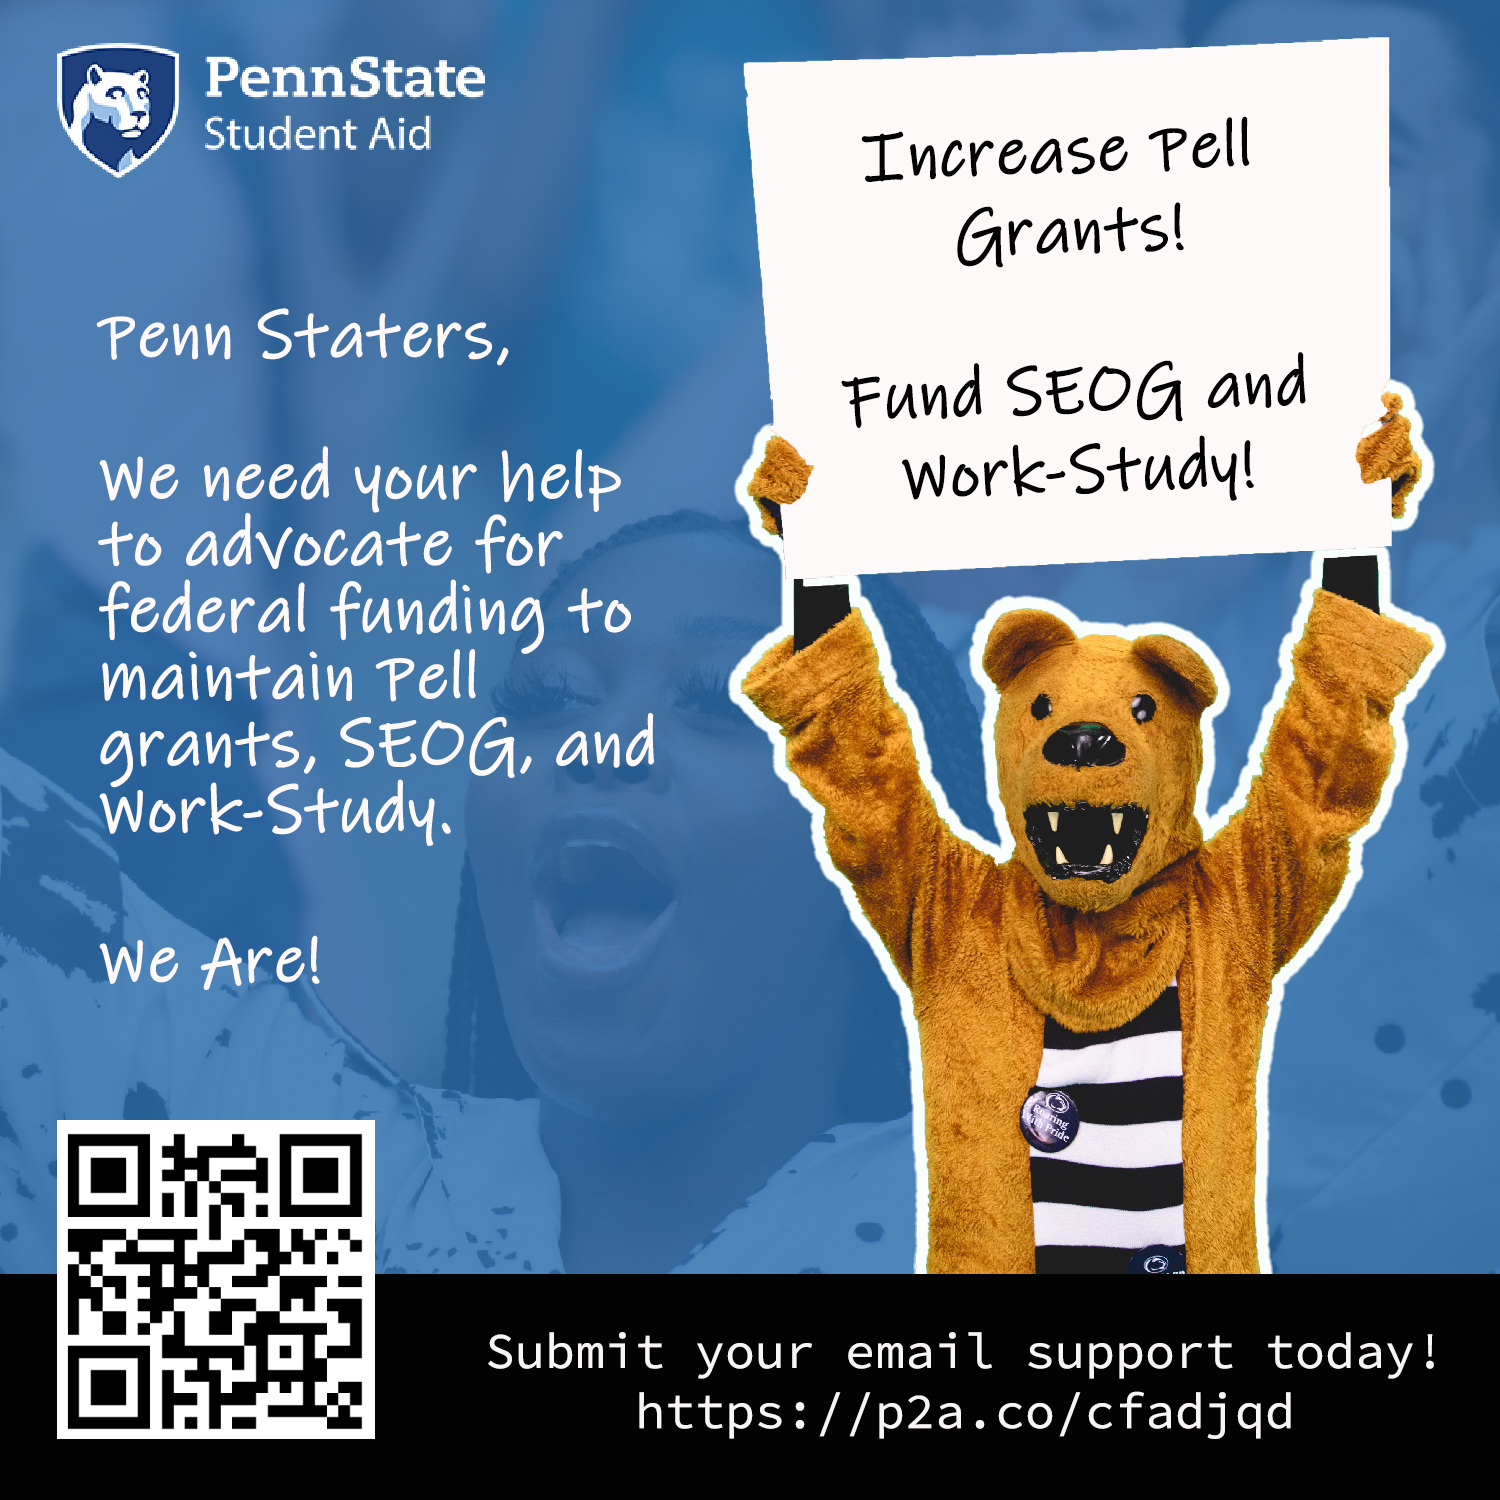 Penn State Lion Mascot holding a sign that says "Increase the Pell" and "Save SEOG and Work-Study".